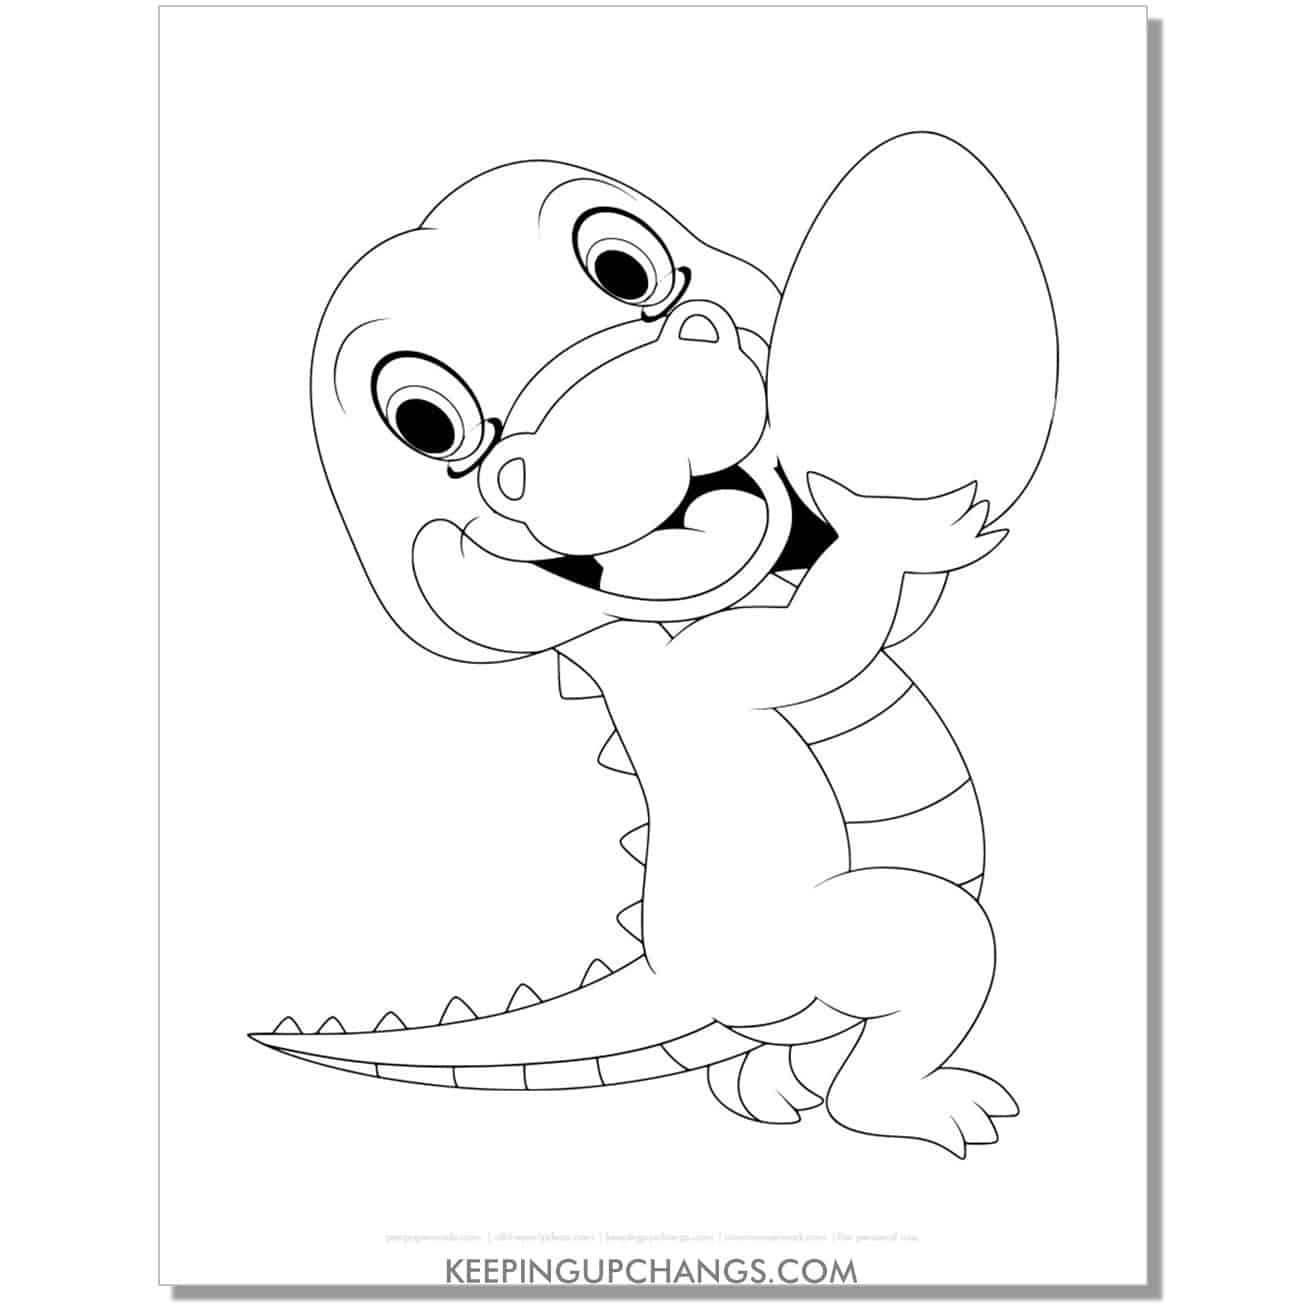 free baby alligator, crocodile holding egg coloring page, sheet.